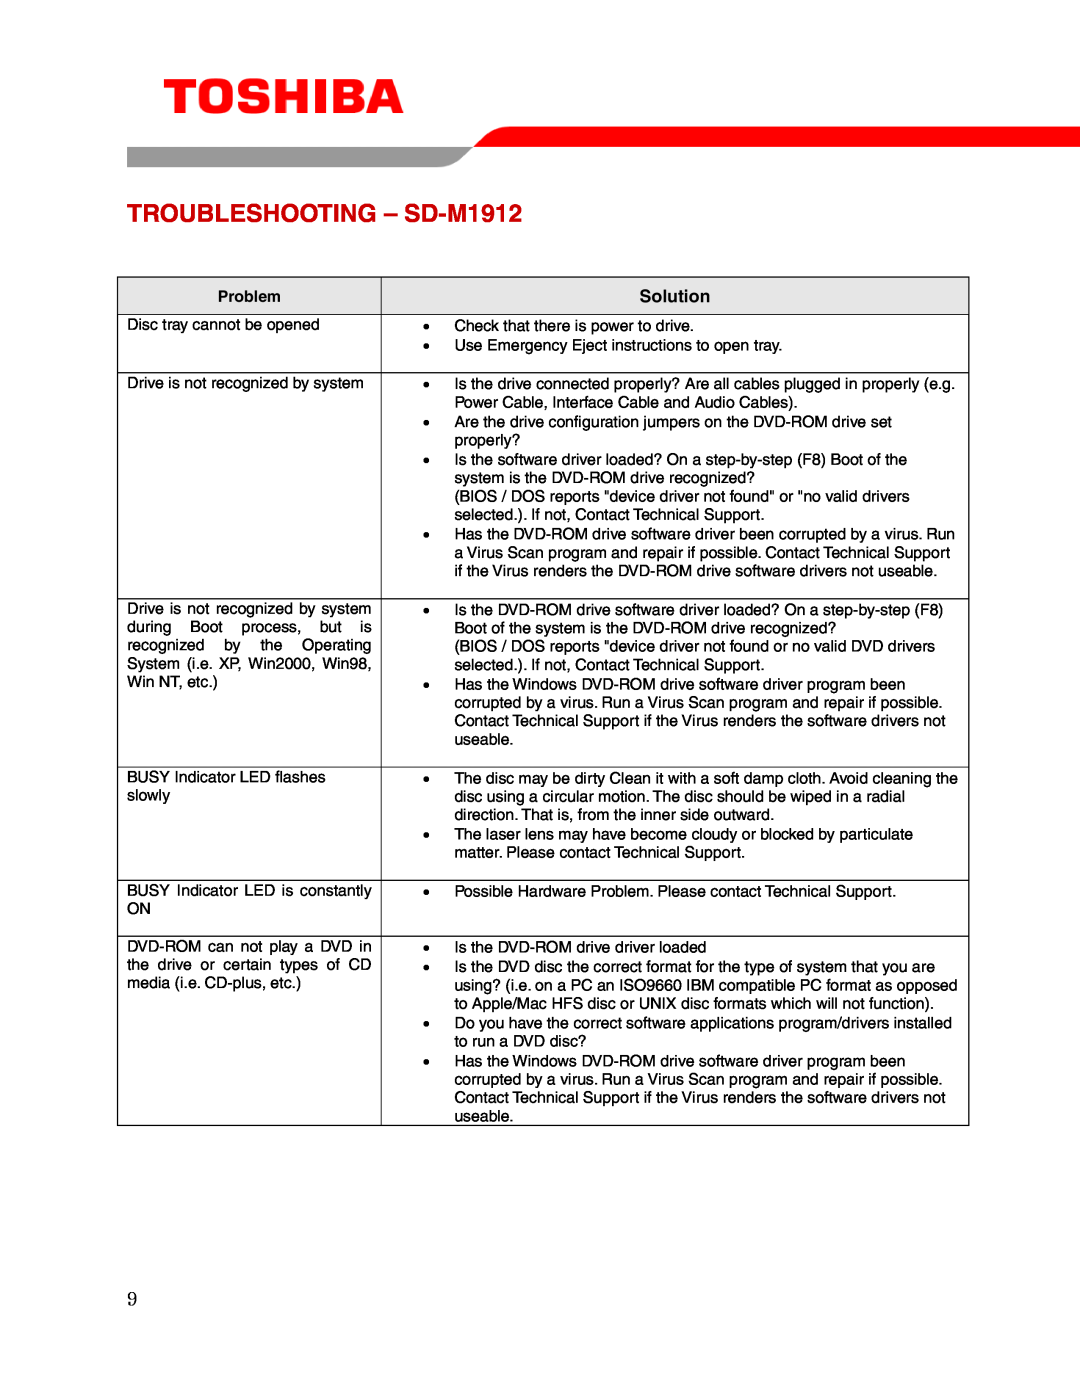 Toshiba user manual TROUBLESHOOTING - SD-M1912, Solution, Problem 